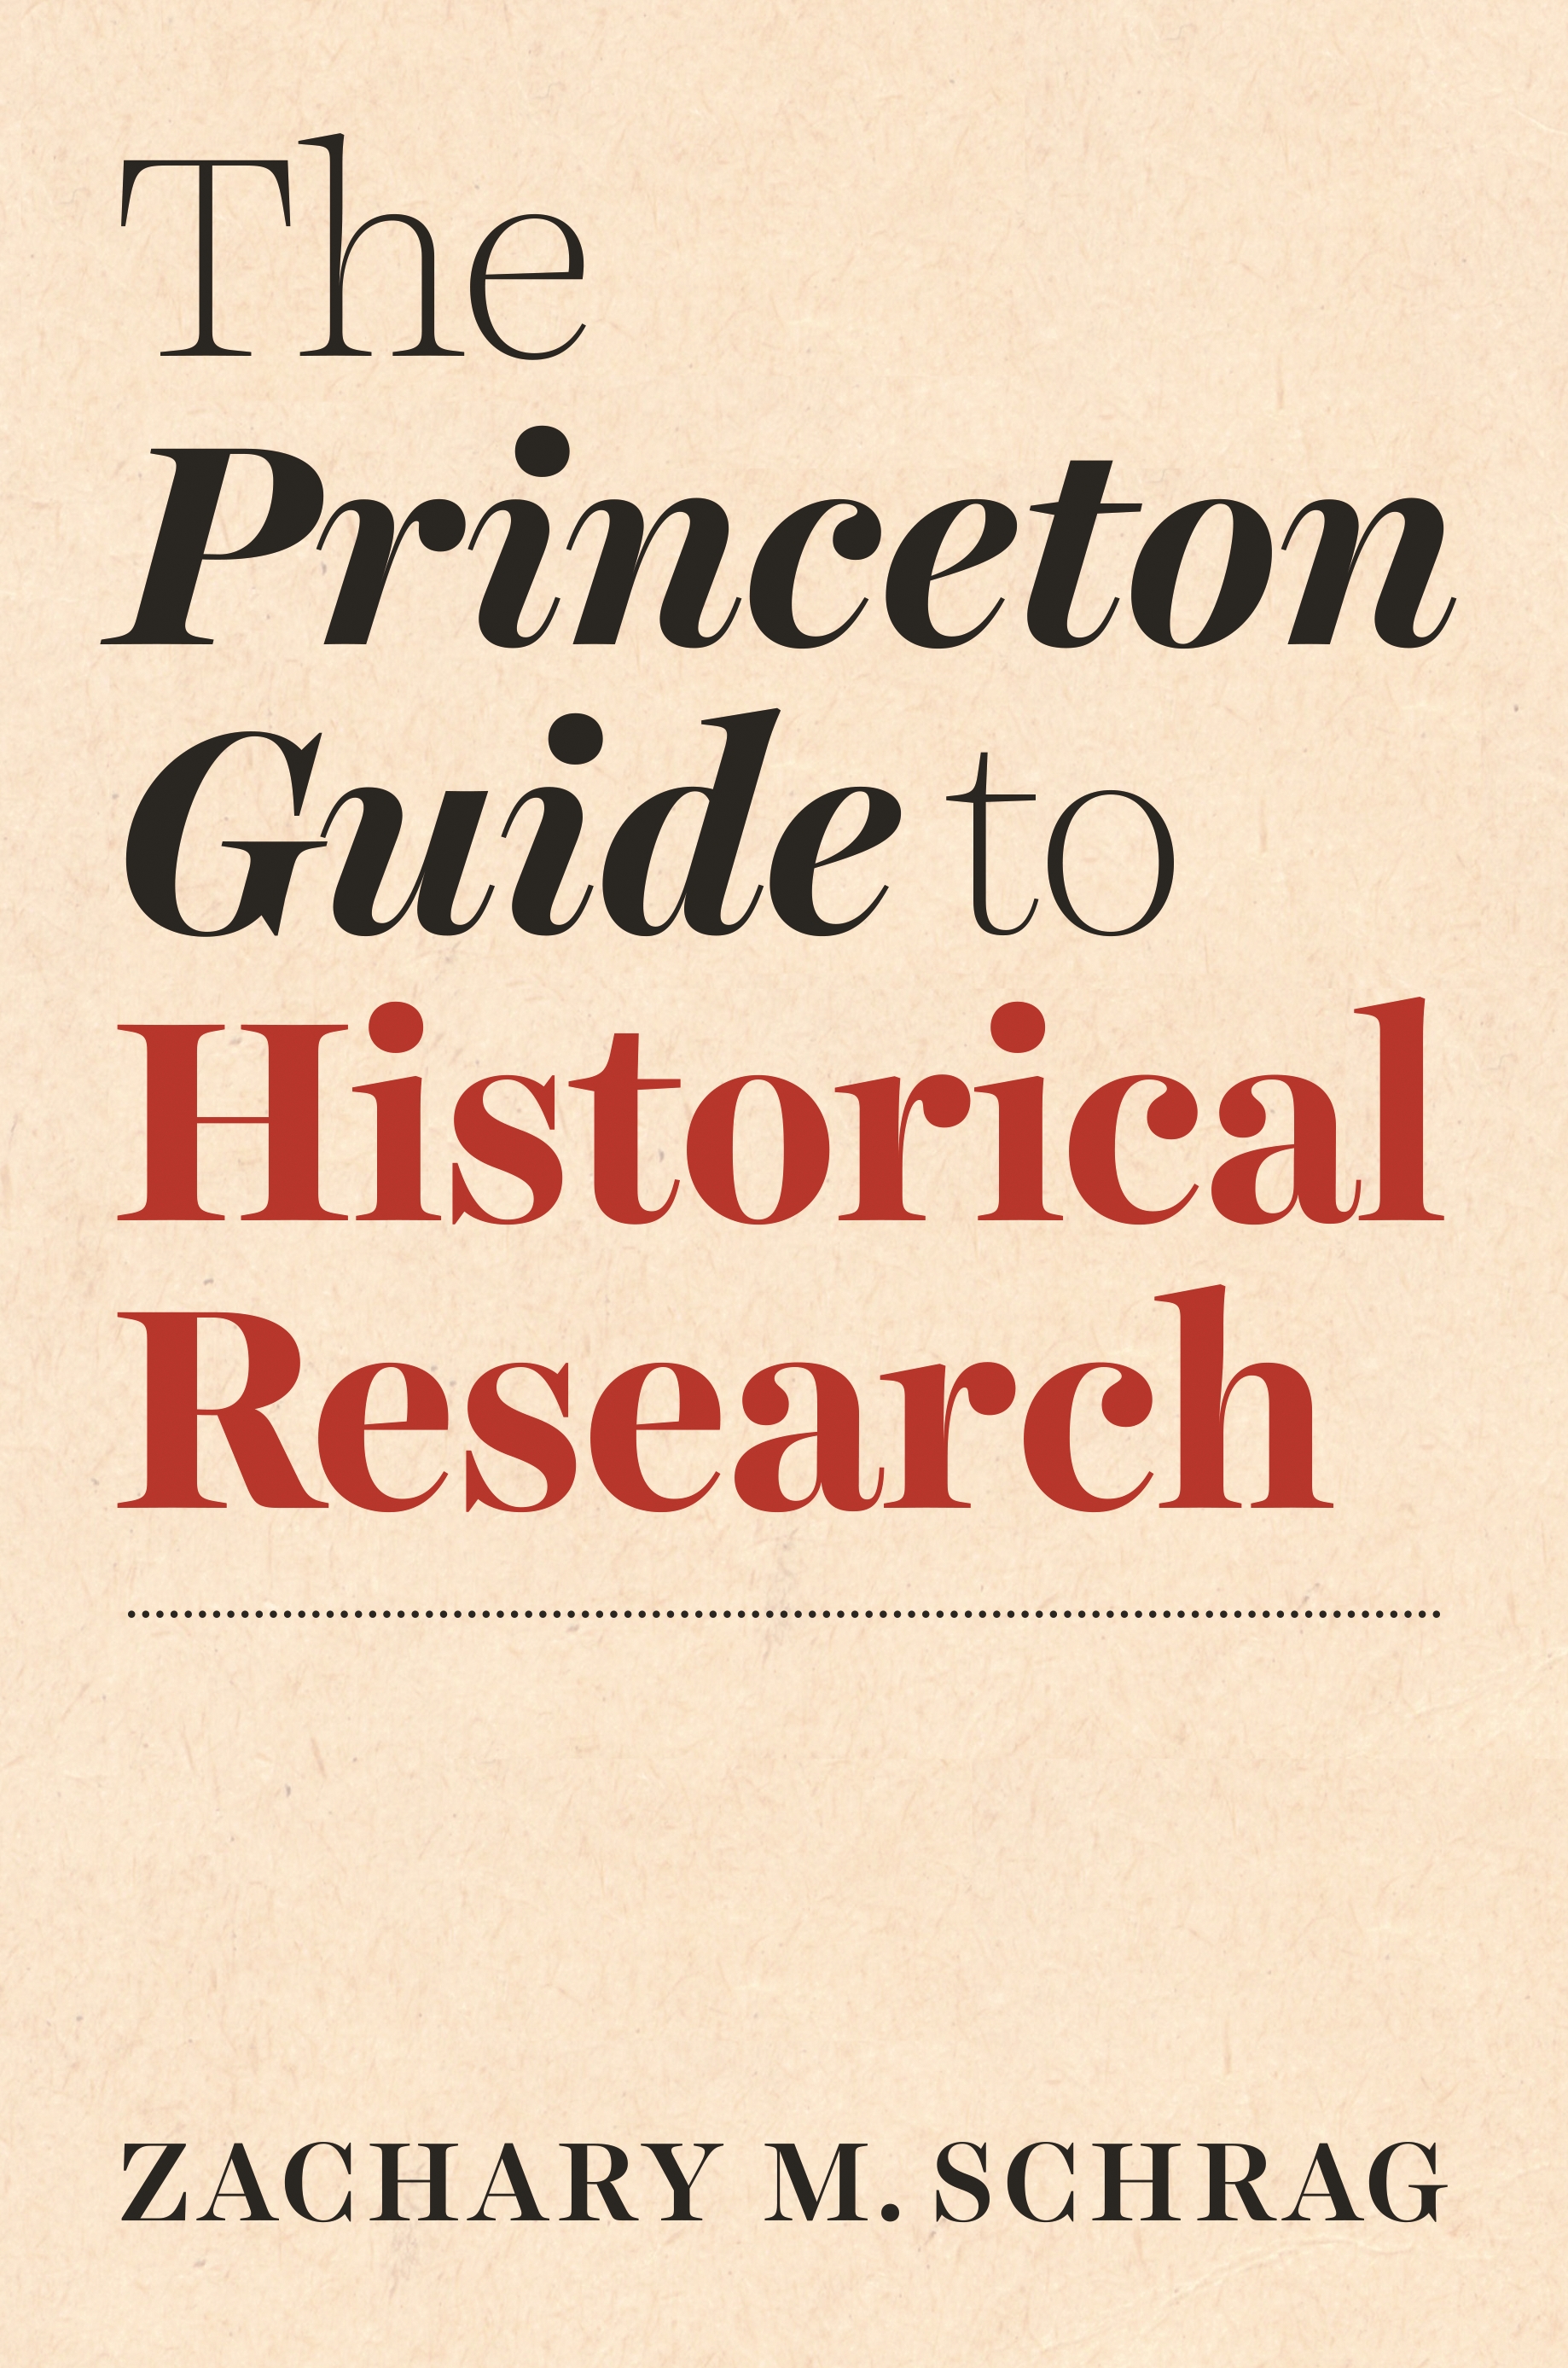 citation in history research